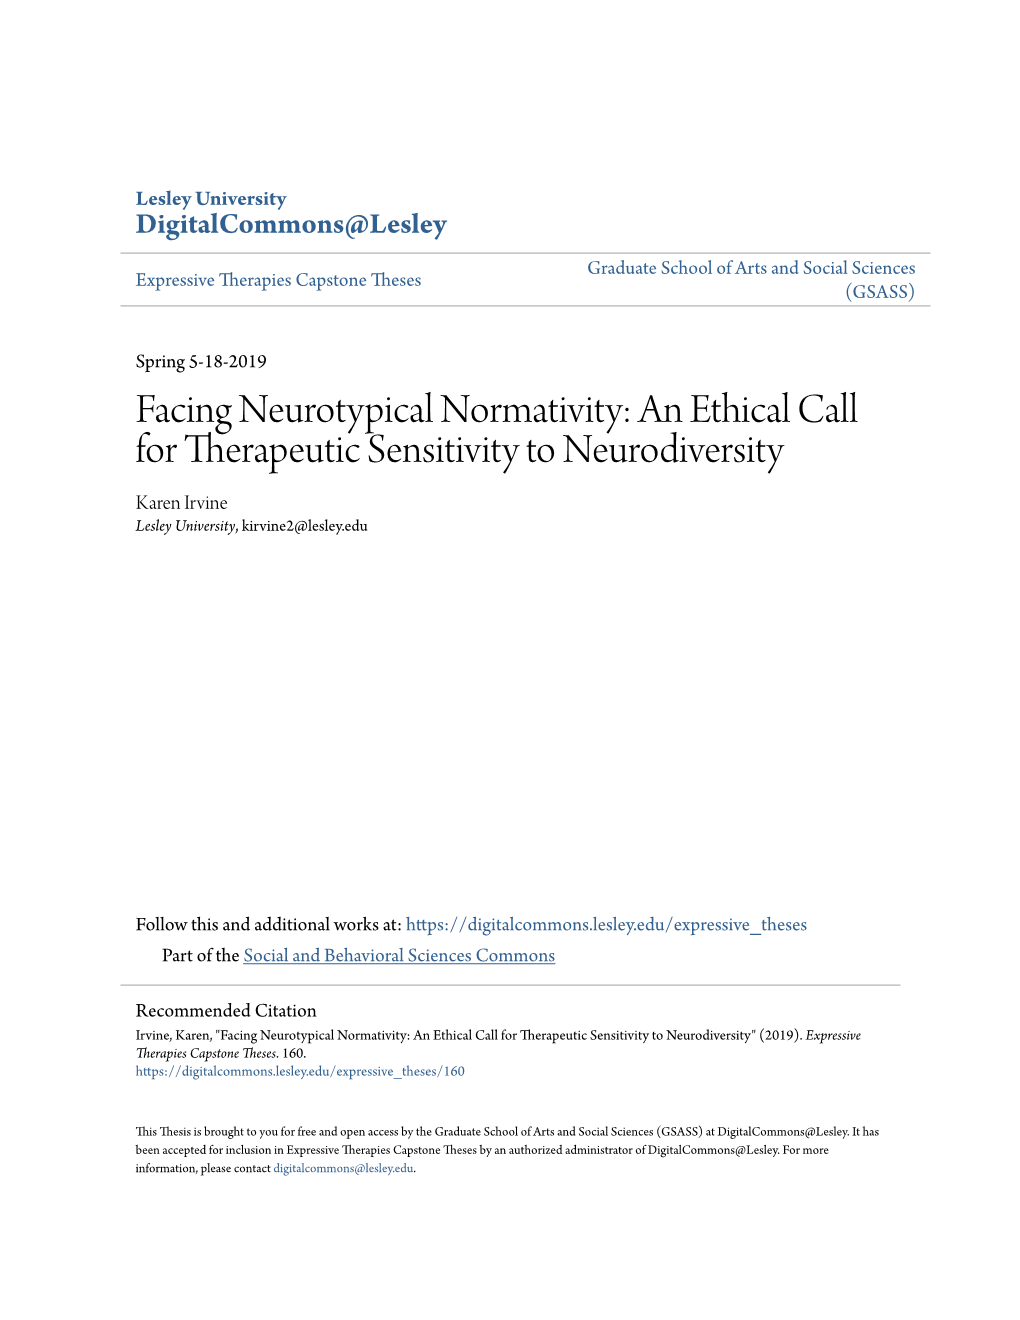 Facing Neurotypical Normativity: an Ethical Call for Therapeutic Sensitivity to Neurodiversity Karen Irvine Lesley University, Kirvine2@Lesley.Edu